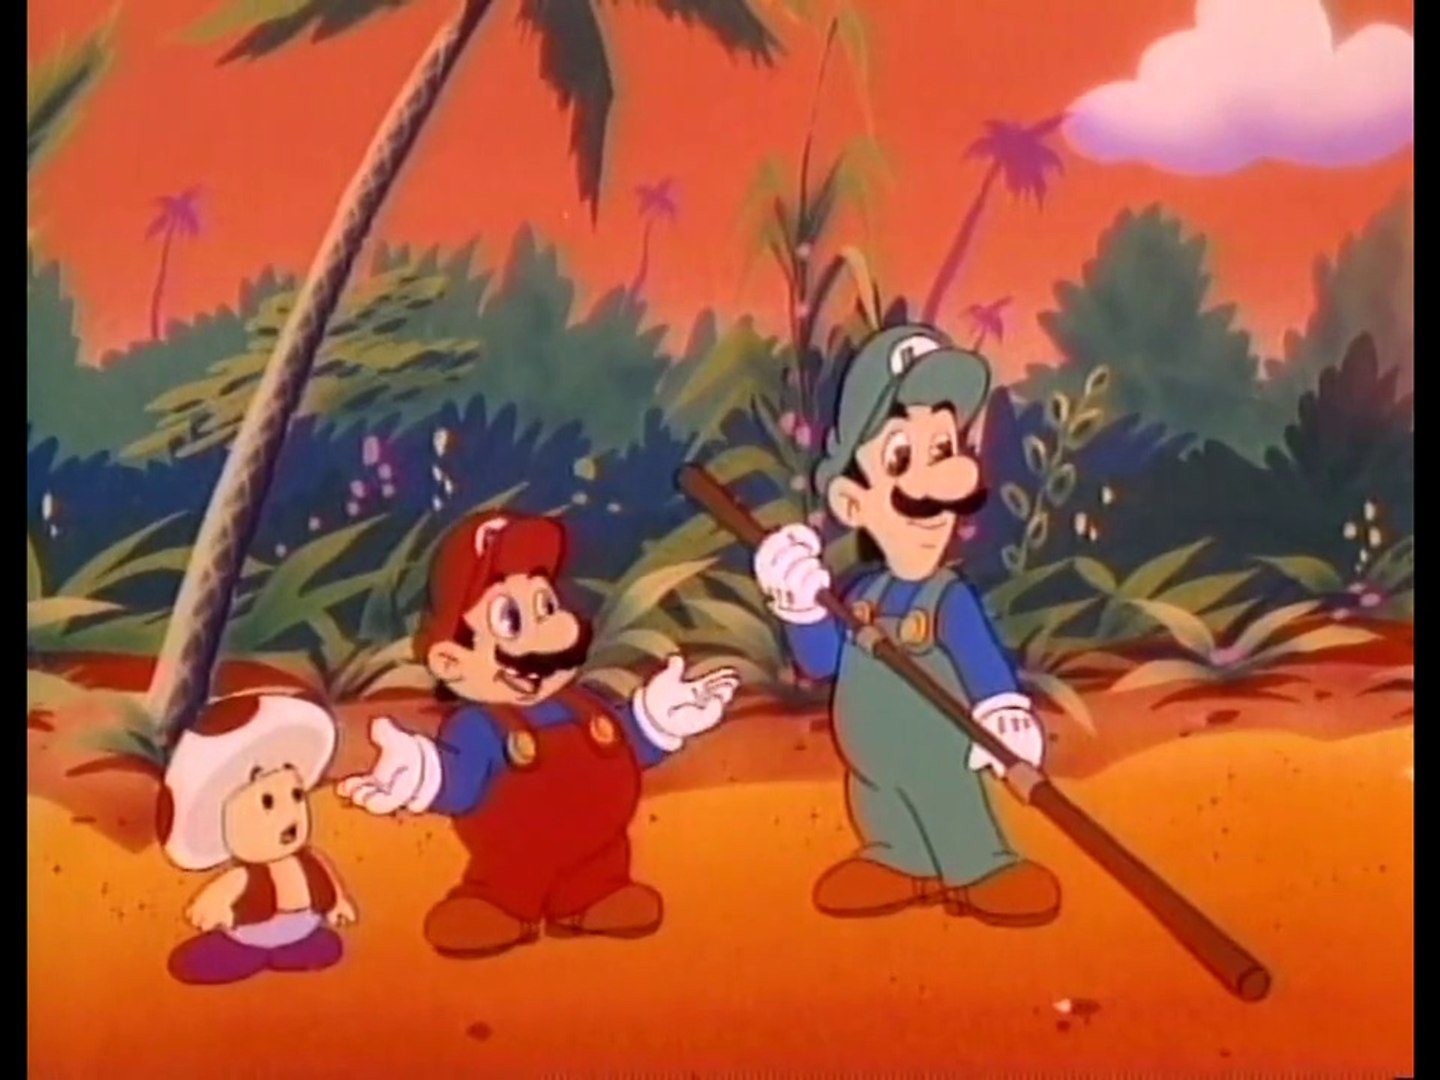 The Super Mario Bros. movie you downloaded might be a trojan